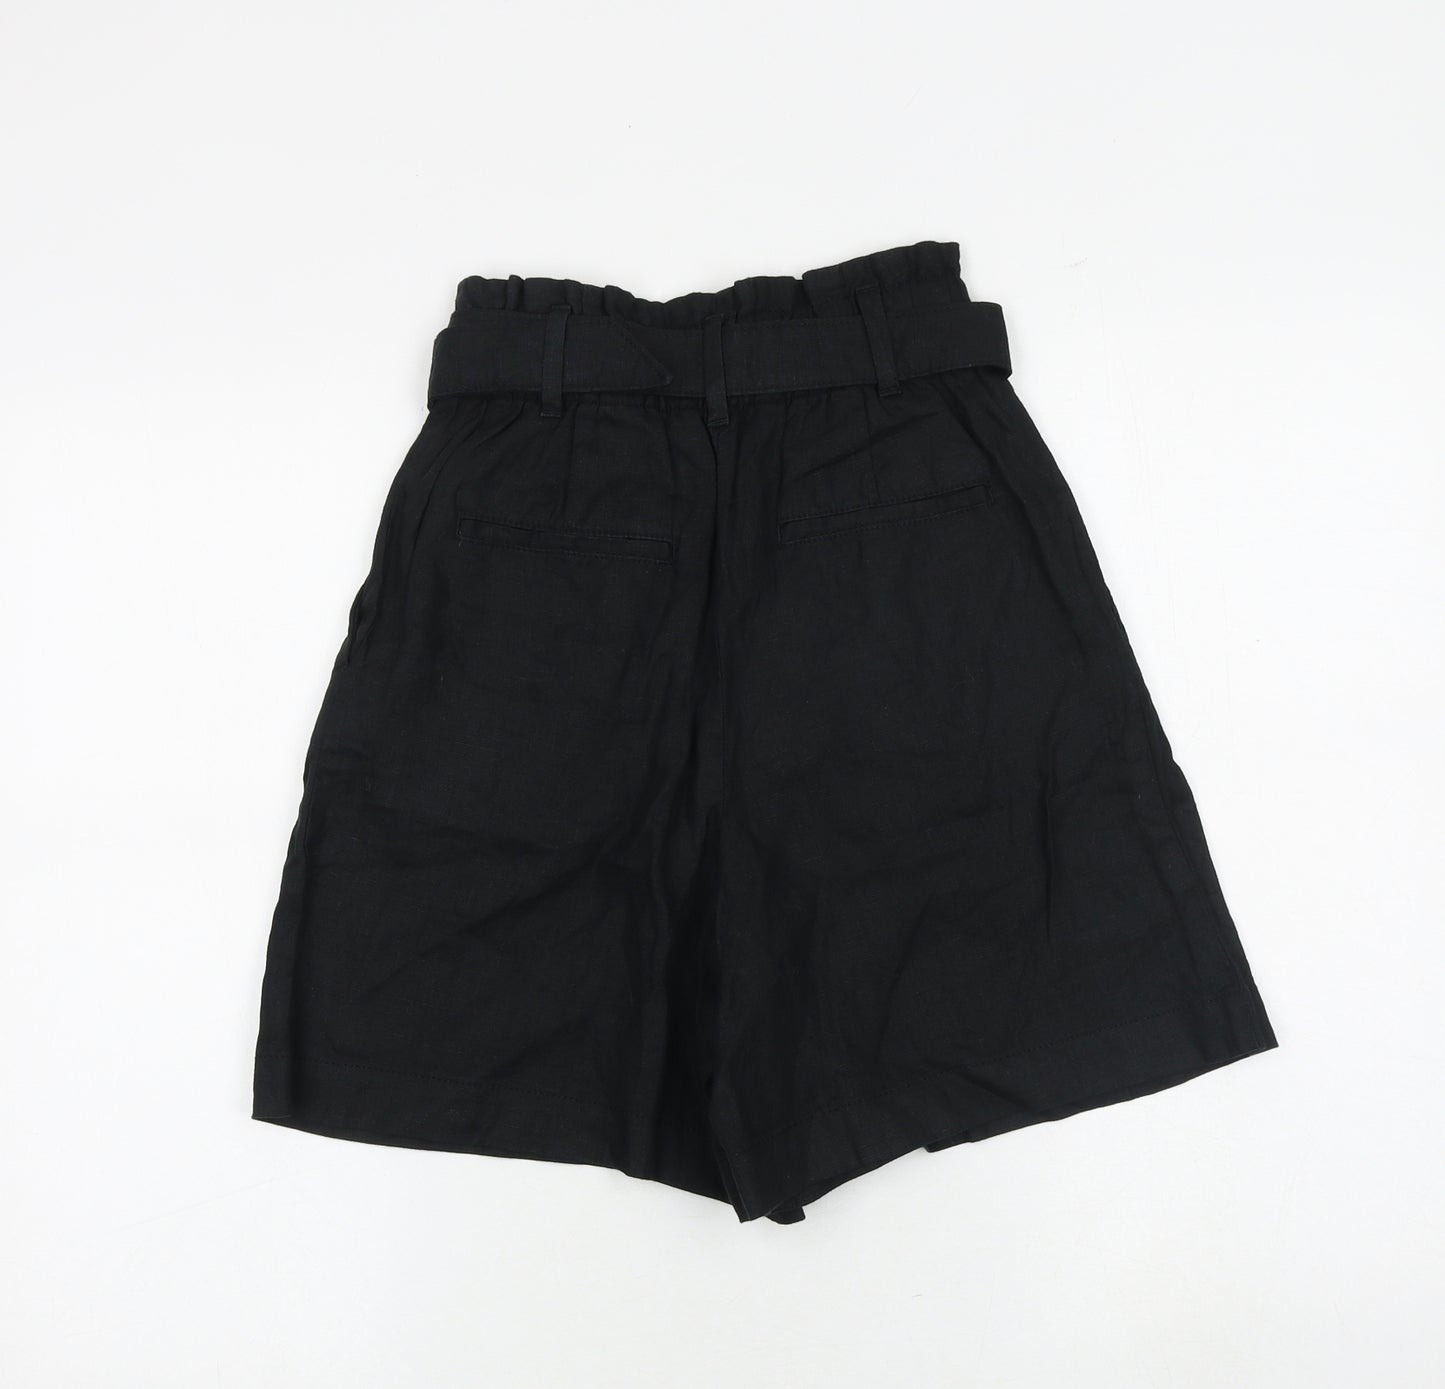 Marks and Spencer Womens Black Leather Culotte Shorts Size 6 Regular Buckle